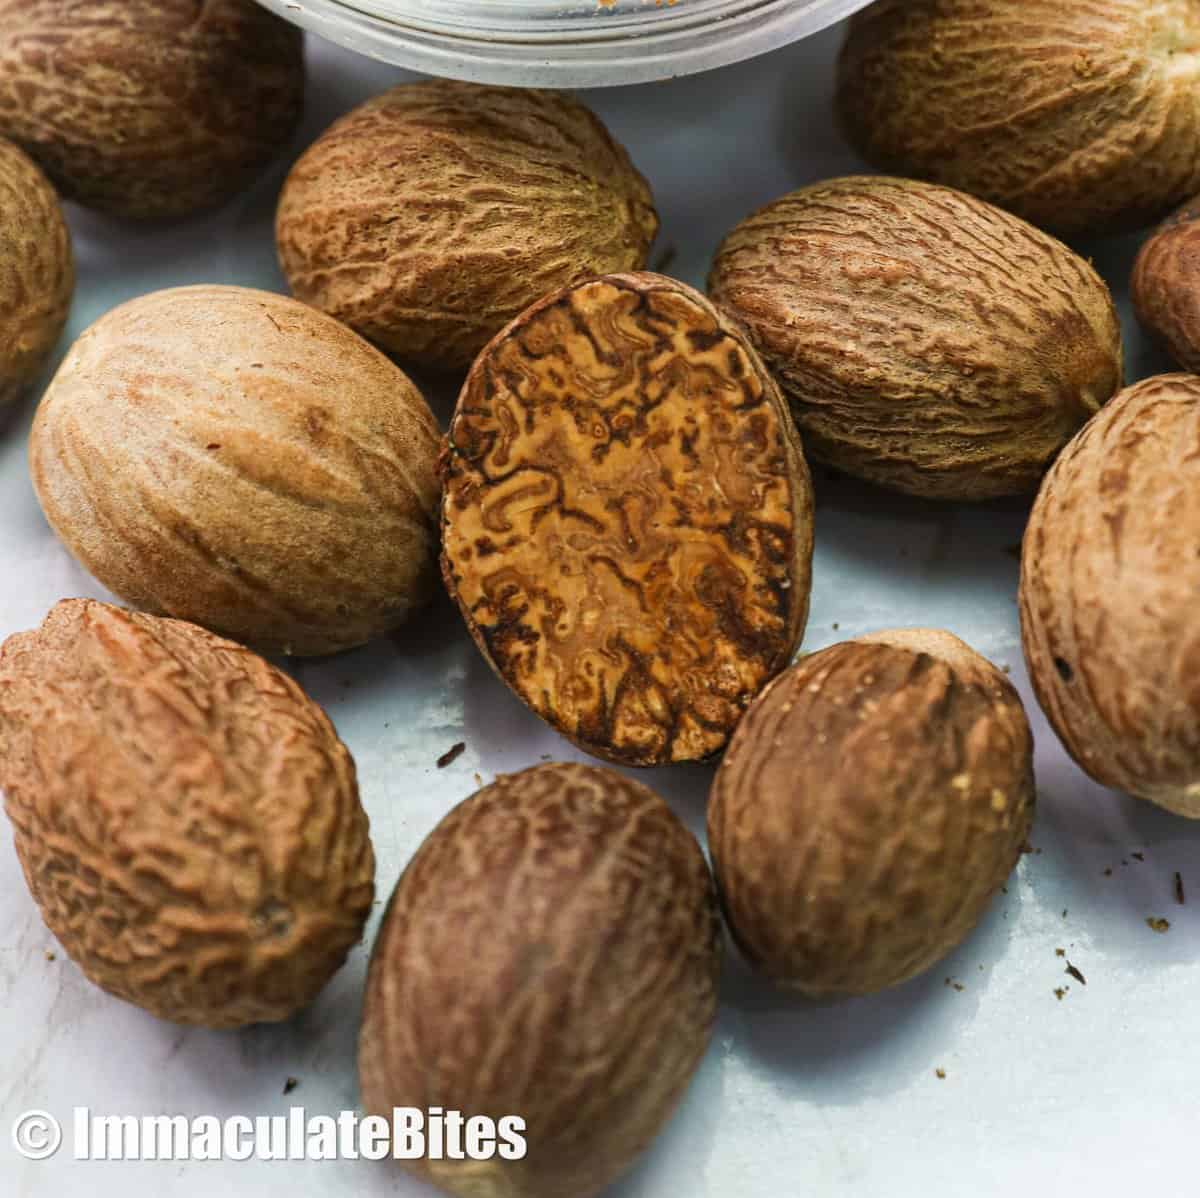 A closeup of whole and grated nutmeg for an inside view